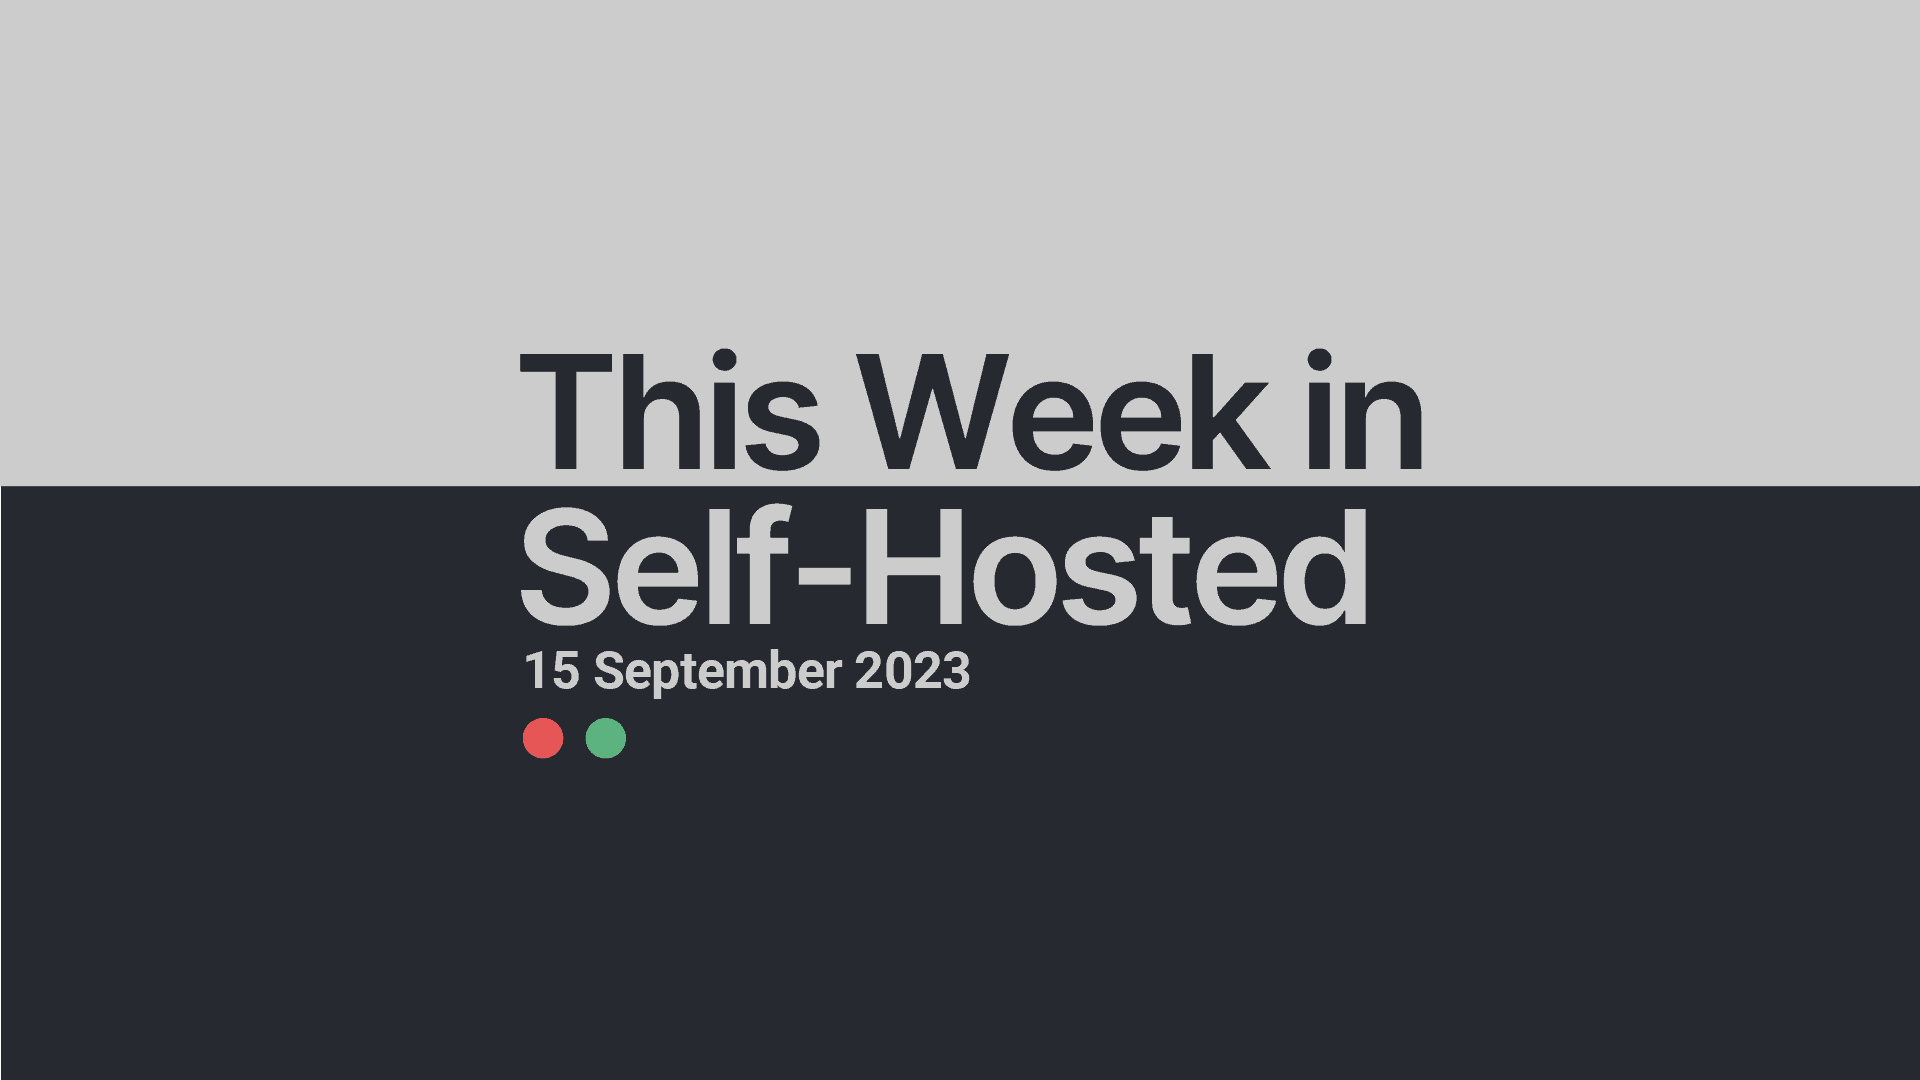 This Week in Self-Hosted (15 September 2023) Post image